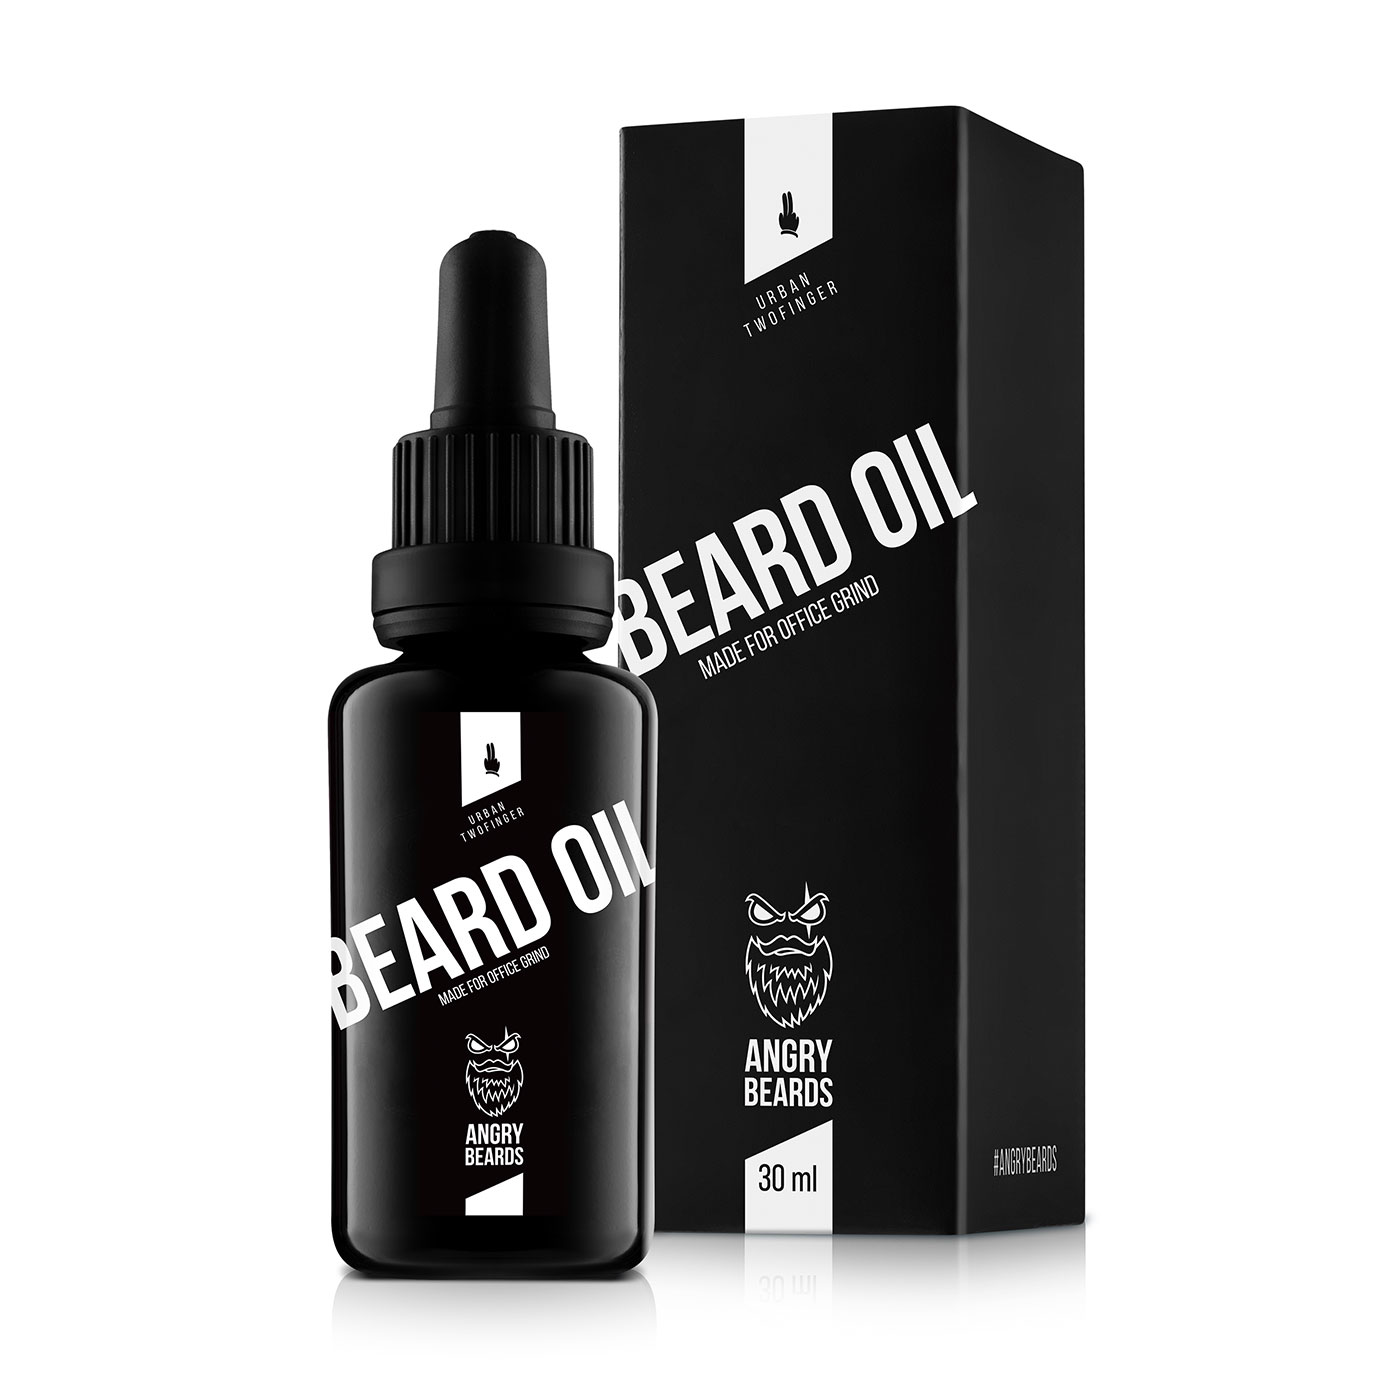 Angry Beards Olej na vousy Urban Twofinger (Beard Oil) 30 ml